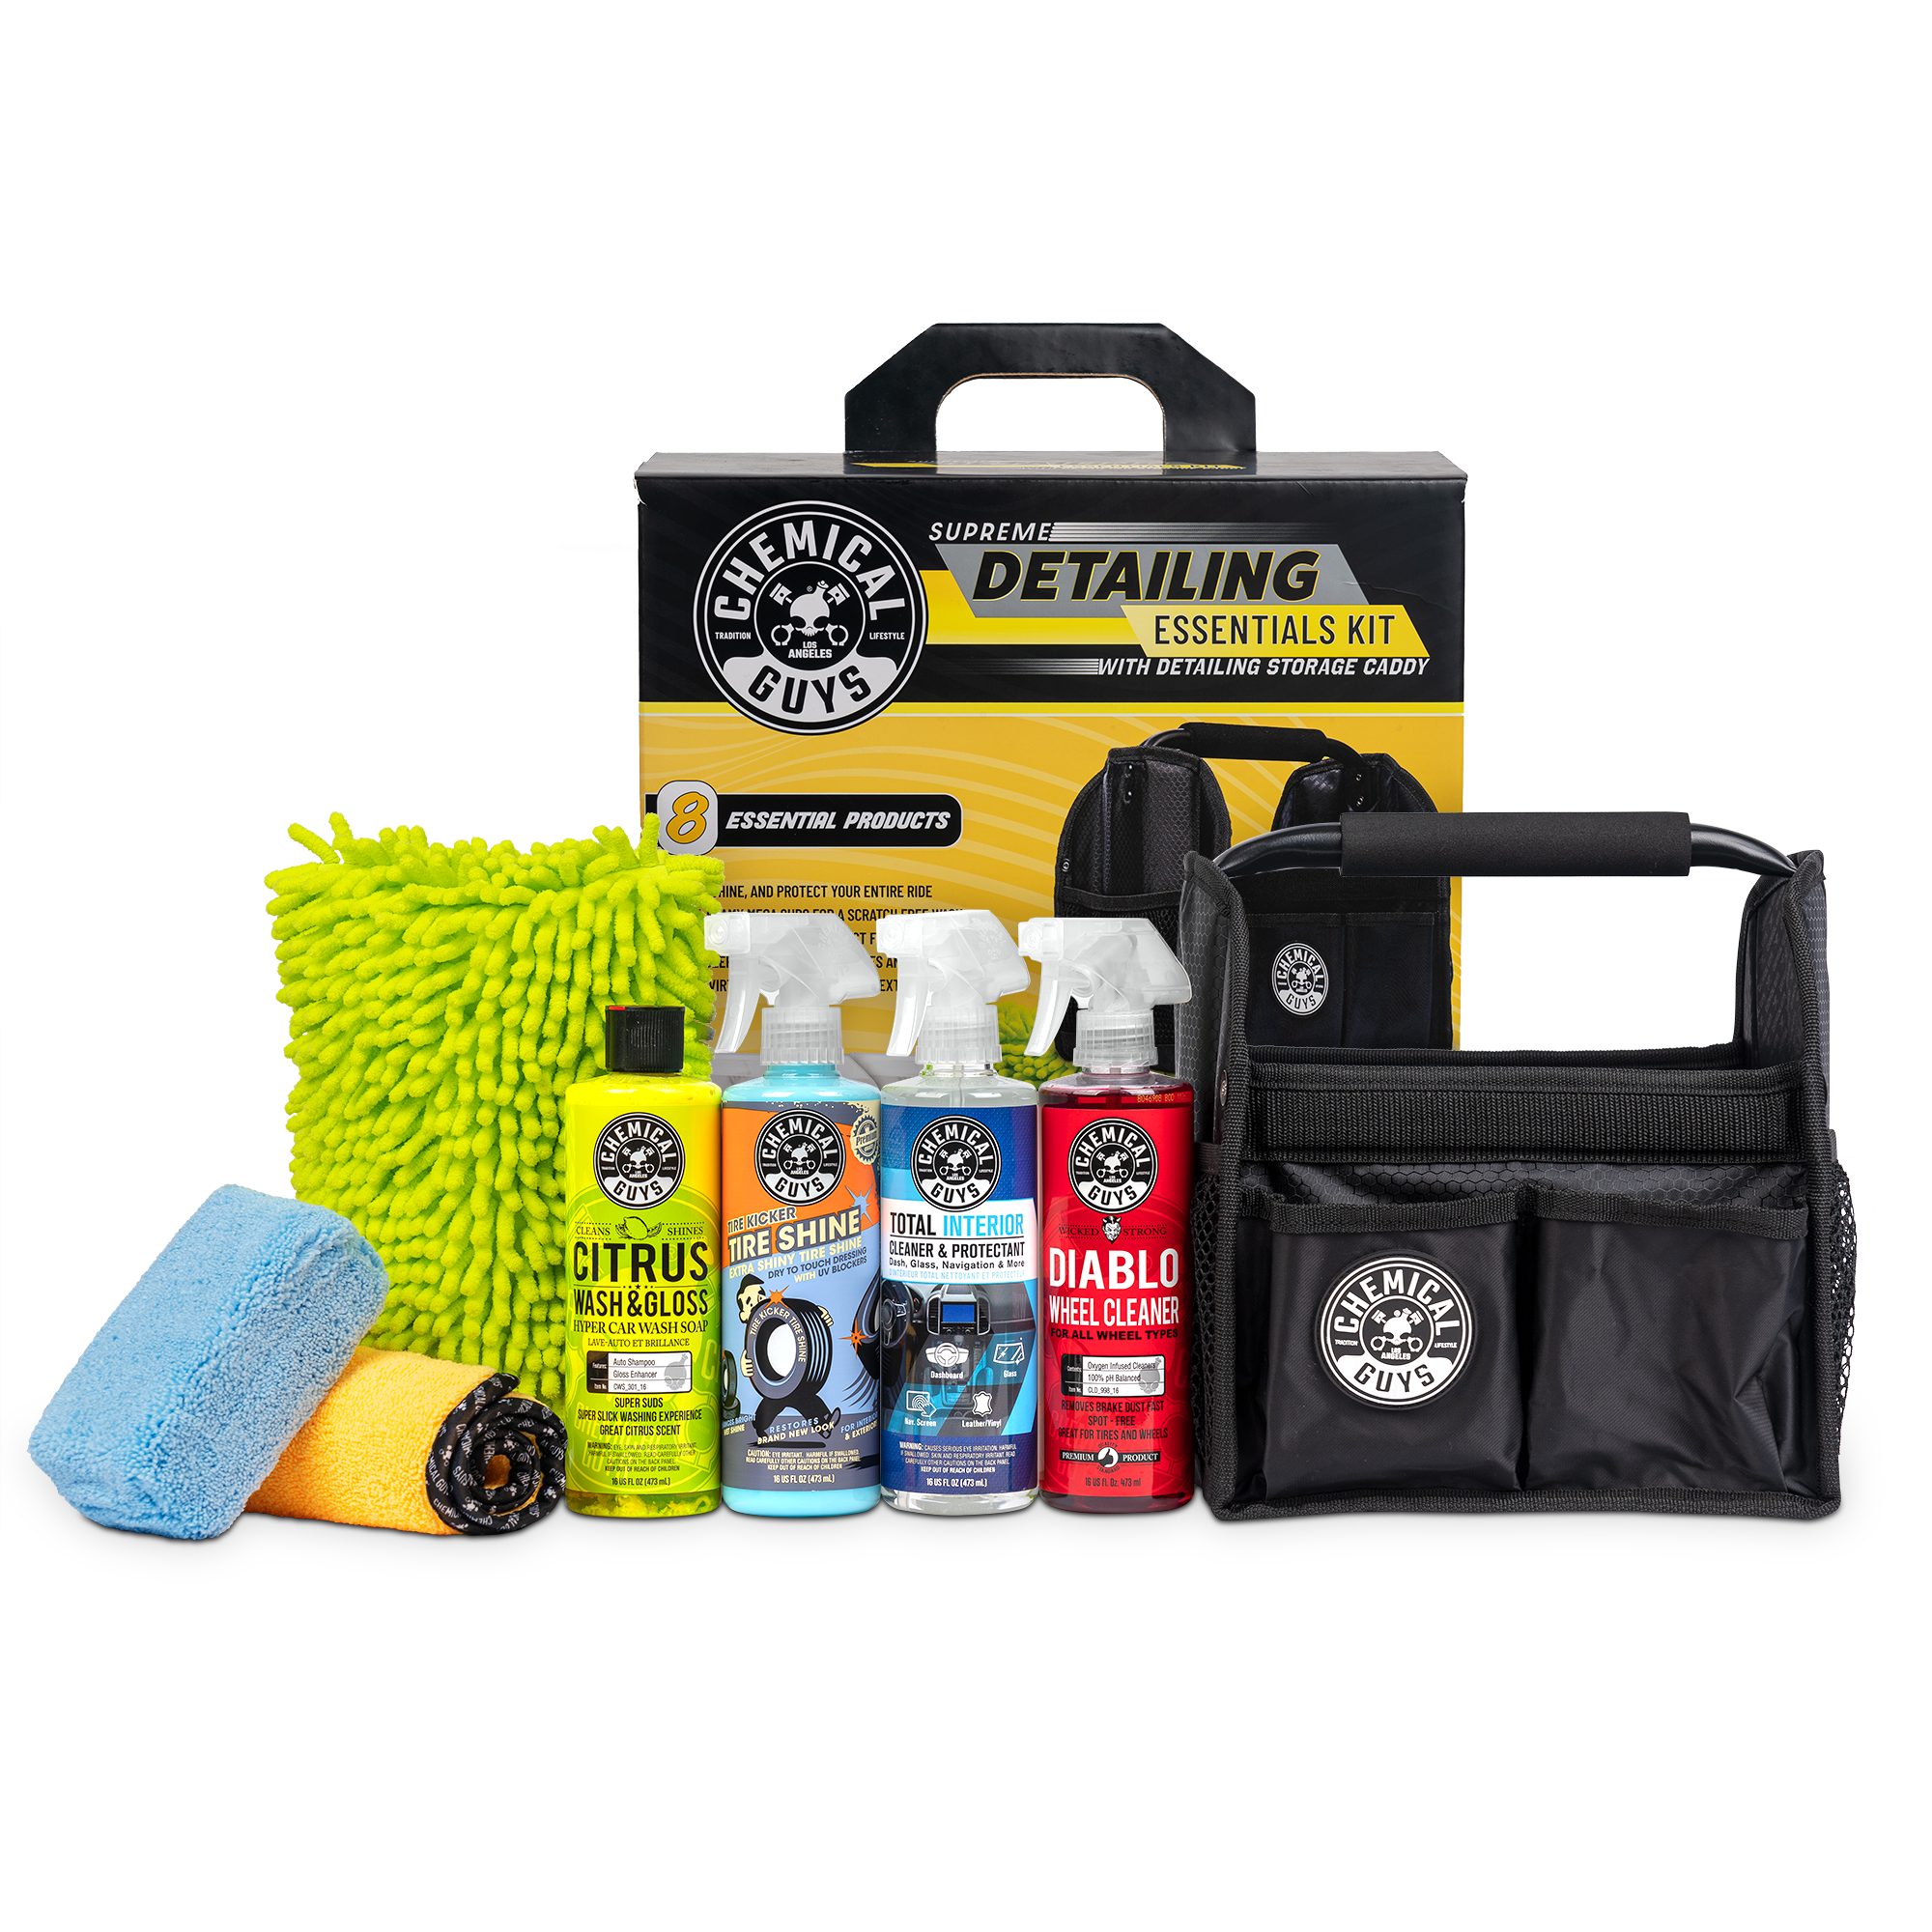 Chemical Guys Supreme Detailing Essentials Kit with Detailing Storage Caddy - image 1 of 11